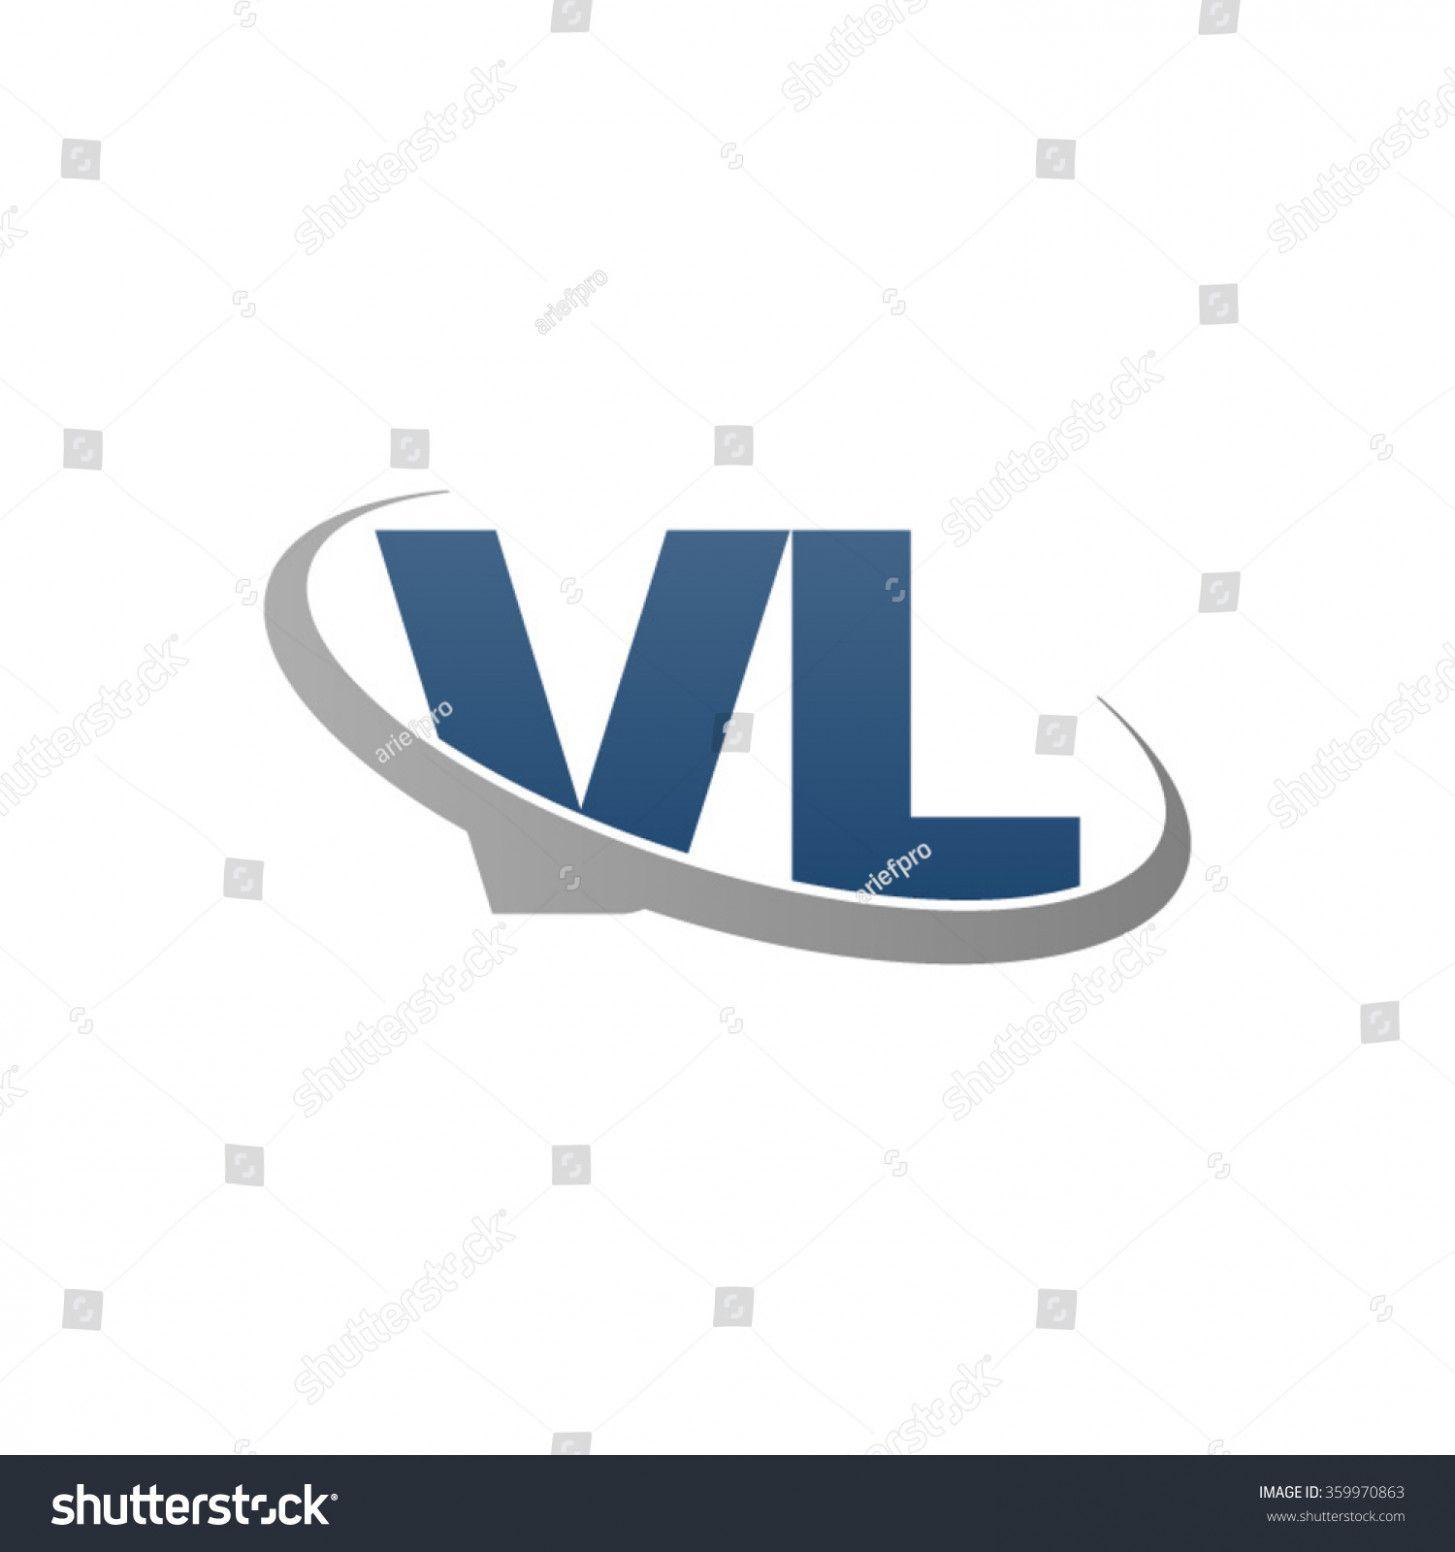 Company with VL Logo - Learn All About Vl Company Logo Name From This